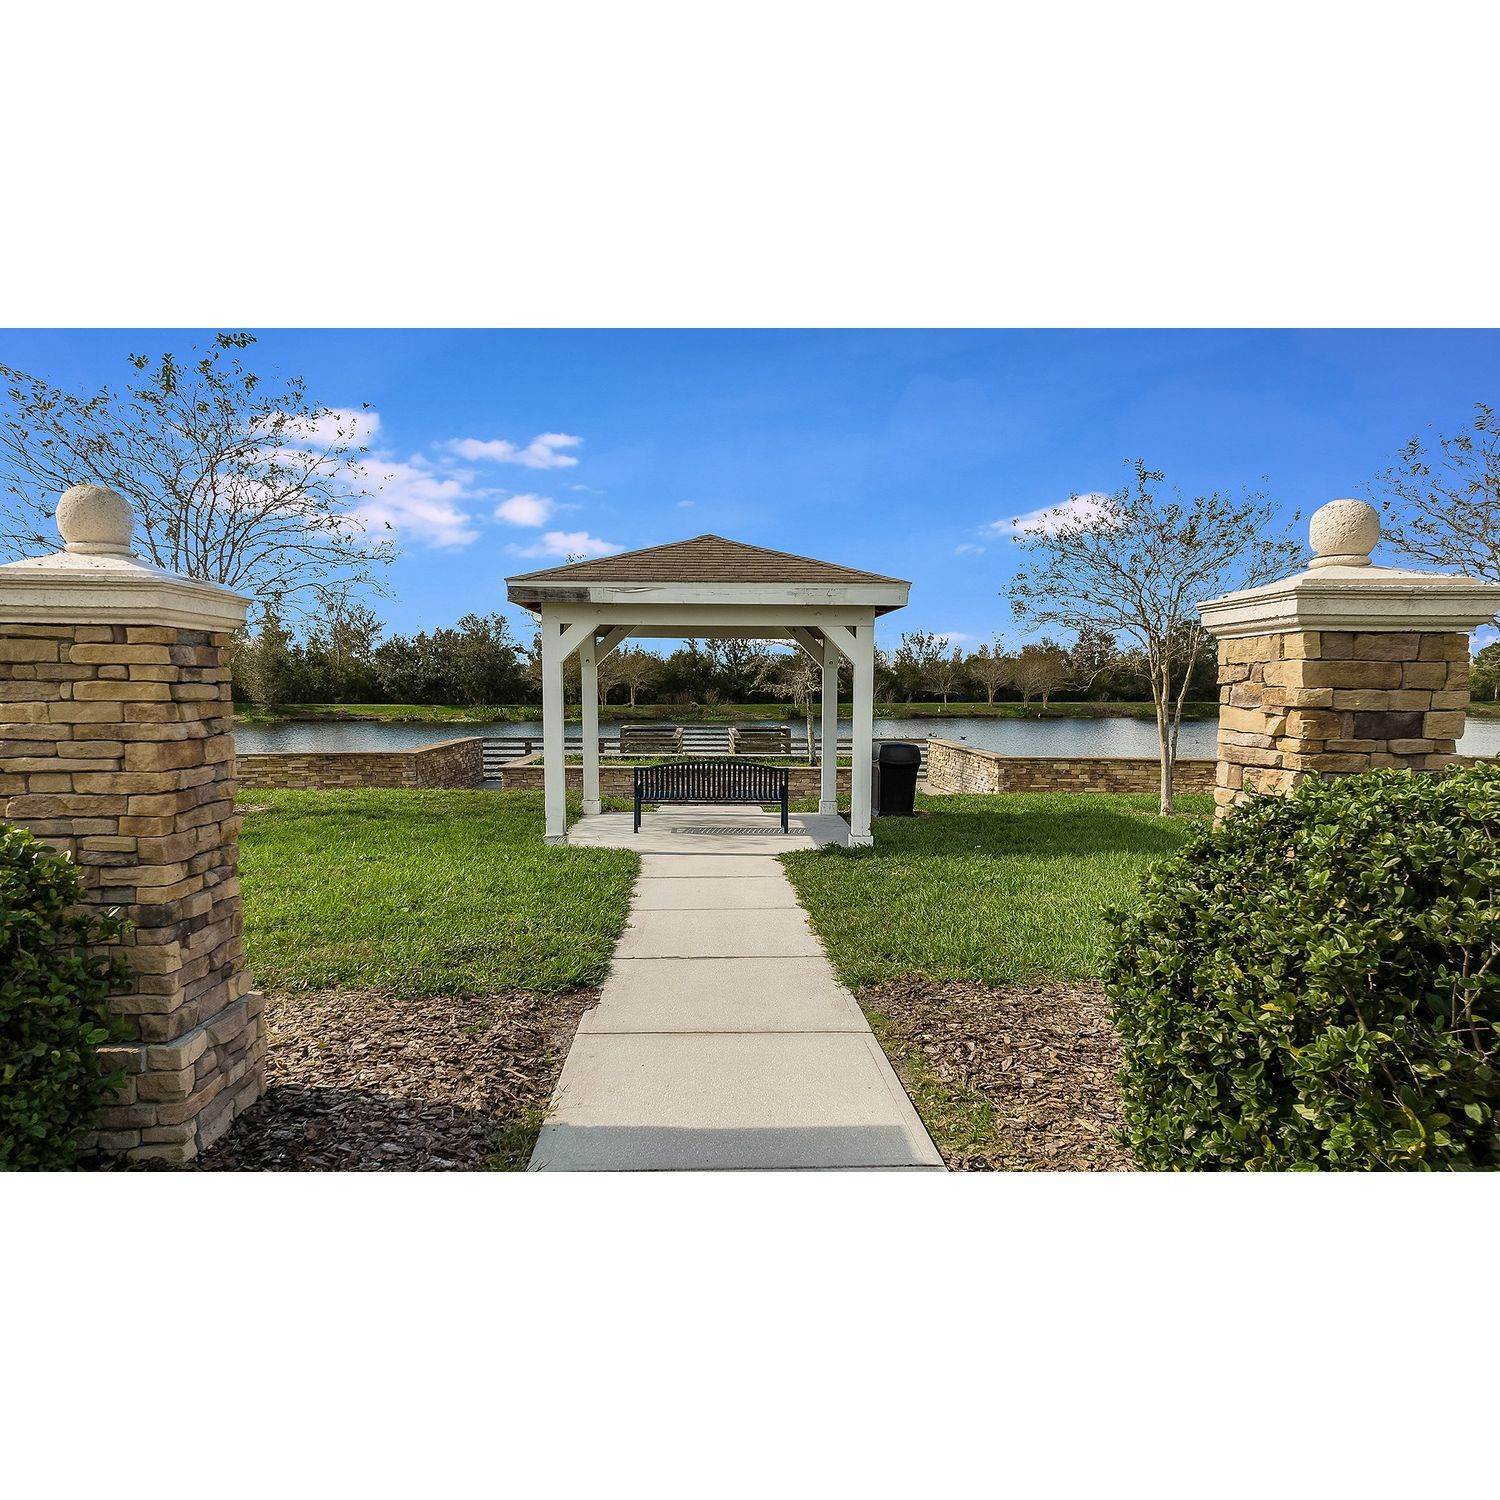 45. The Townhomes at Anthem Park gebouw op 4590 Calvary Way, St. Cloud, FL 34769